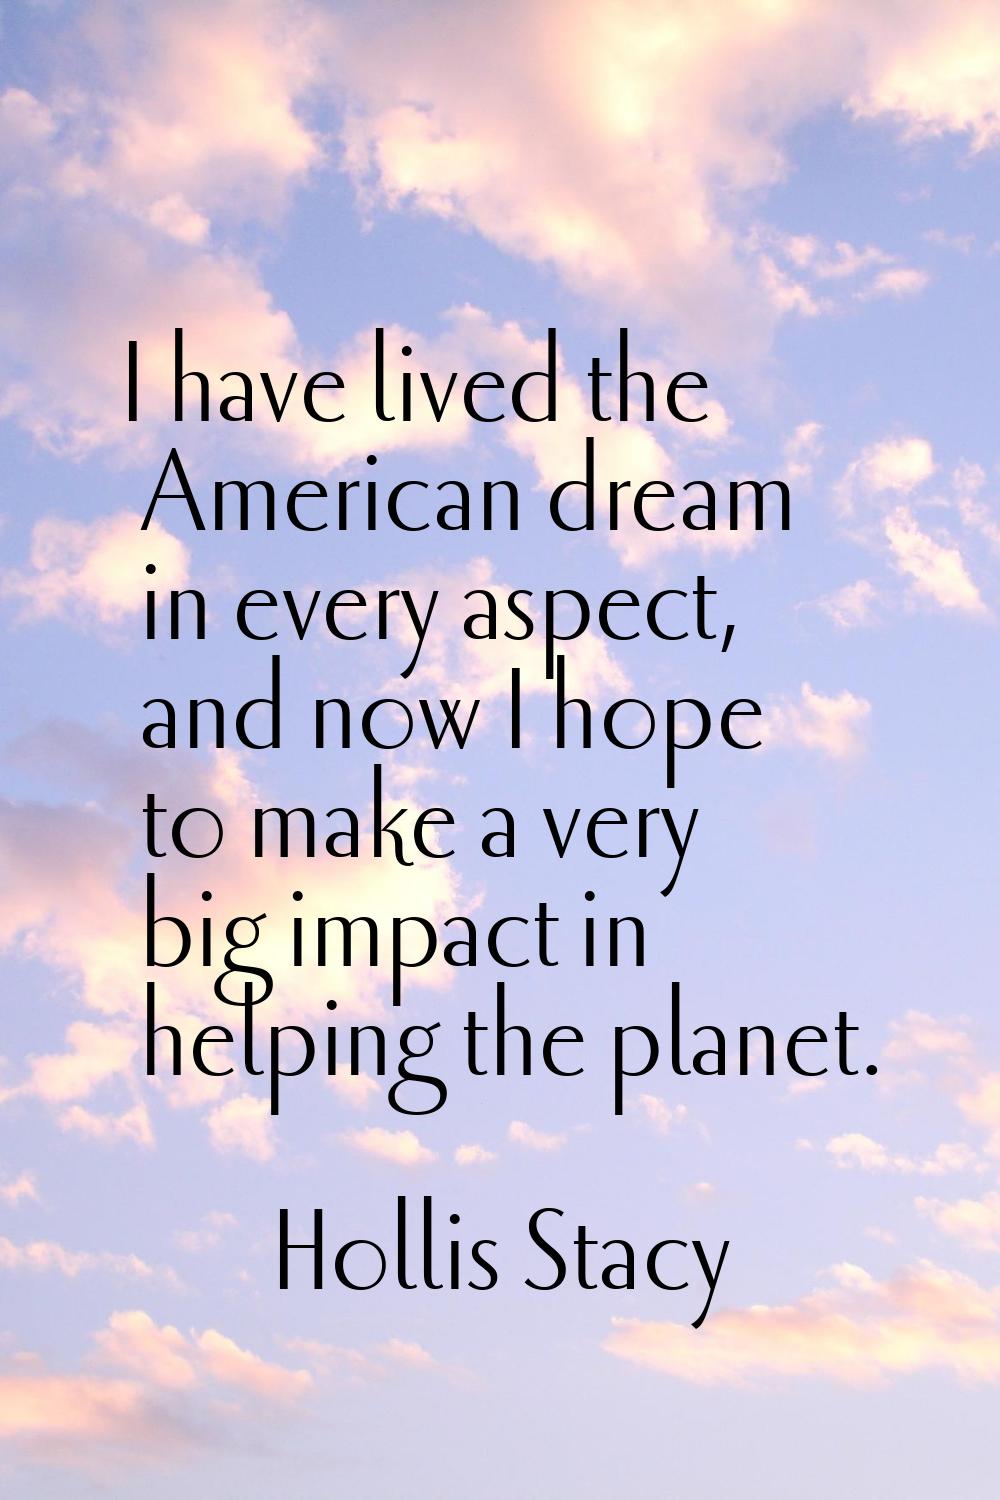 I have lived the American dream in every aspect, and now I hope to make a very big impact in helpin